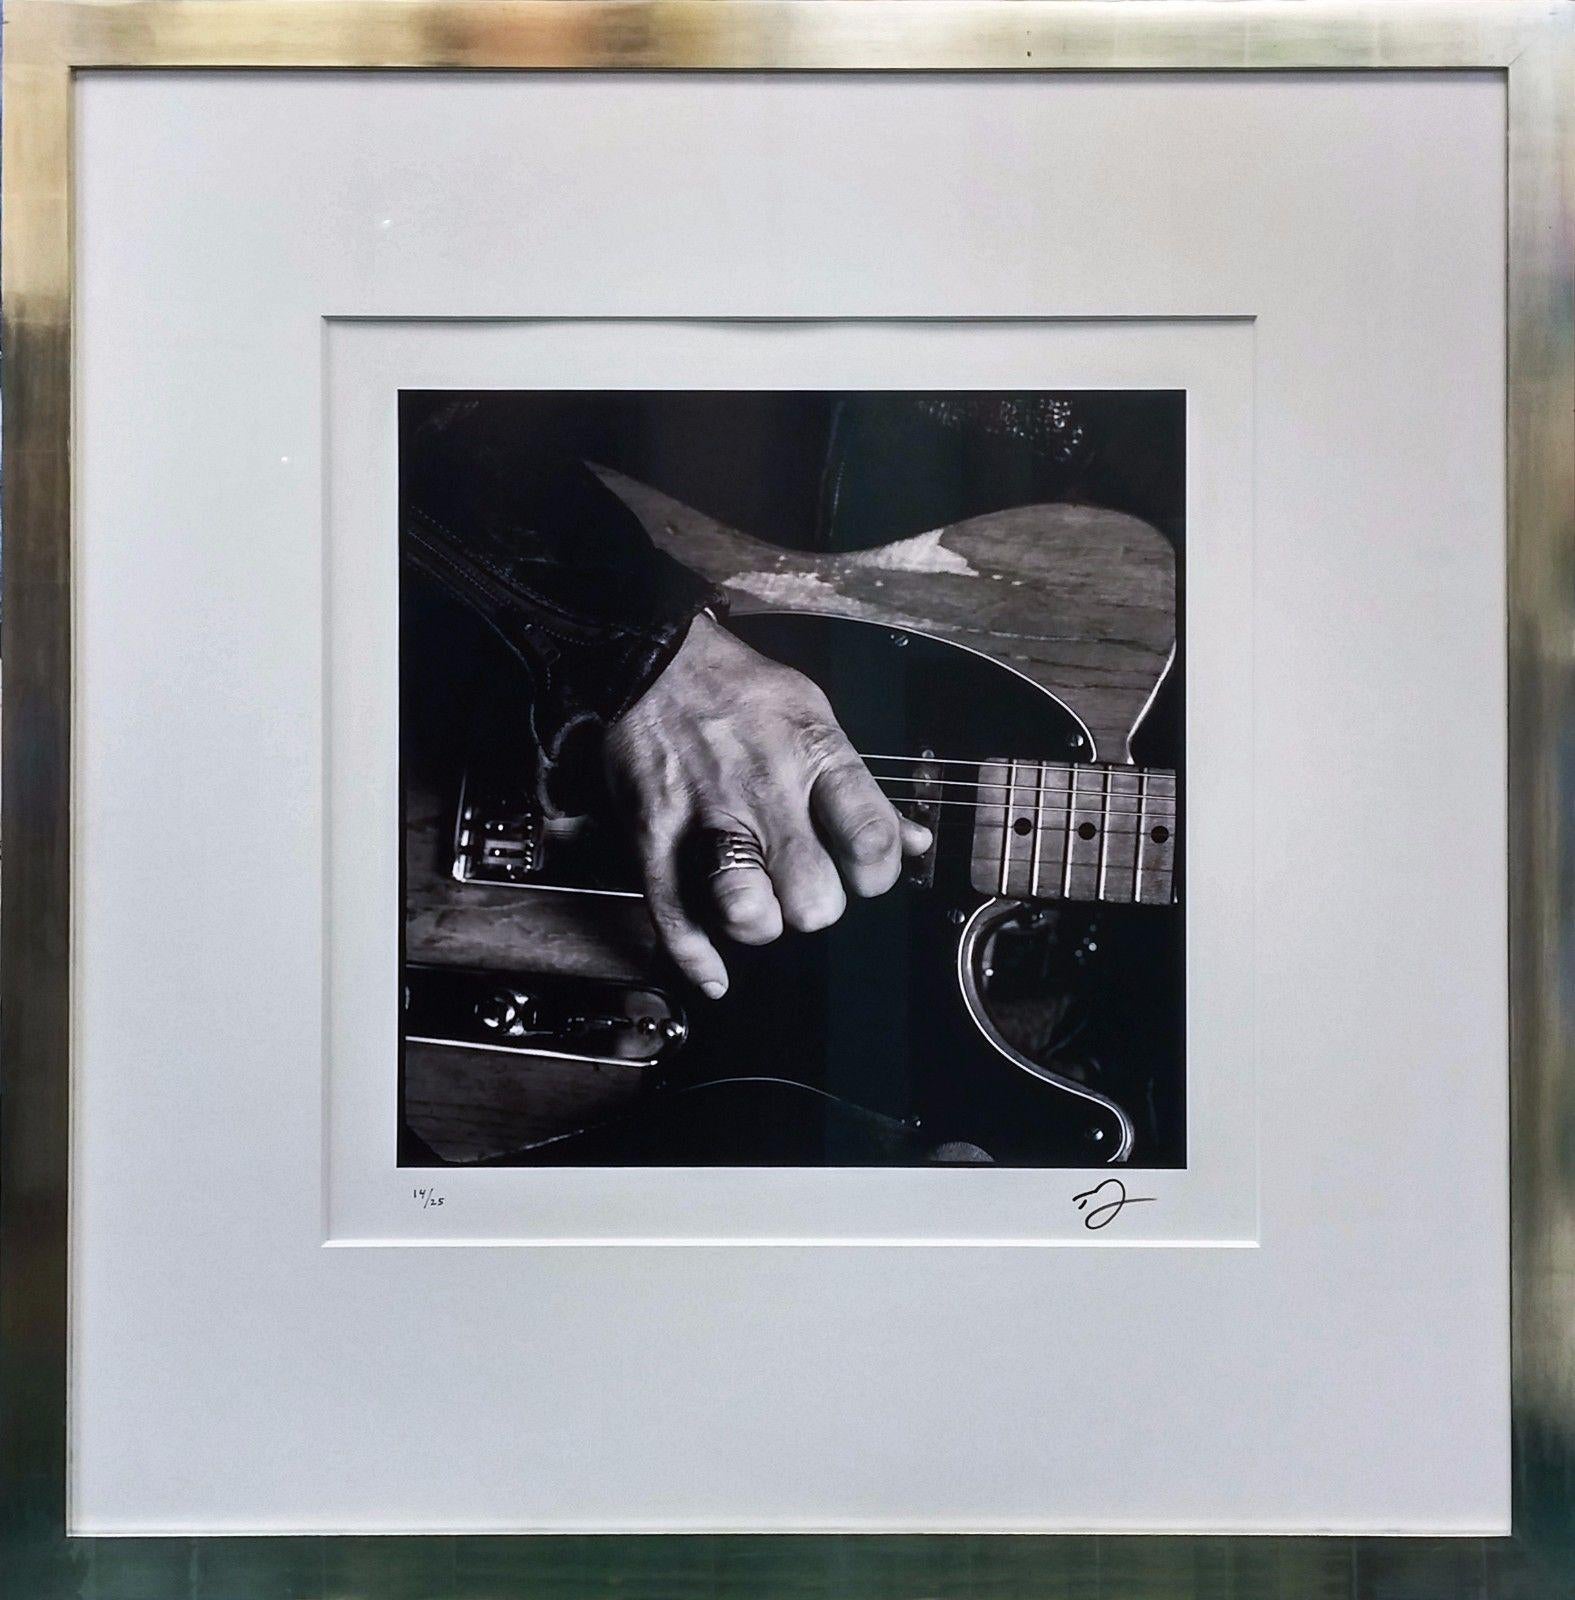 BRUCE SPRINGSTEEN, HAND, MAILIBU, CA, 1991 - Photograph by Timothy White